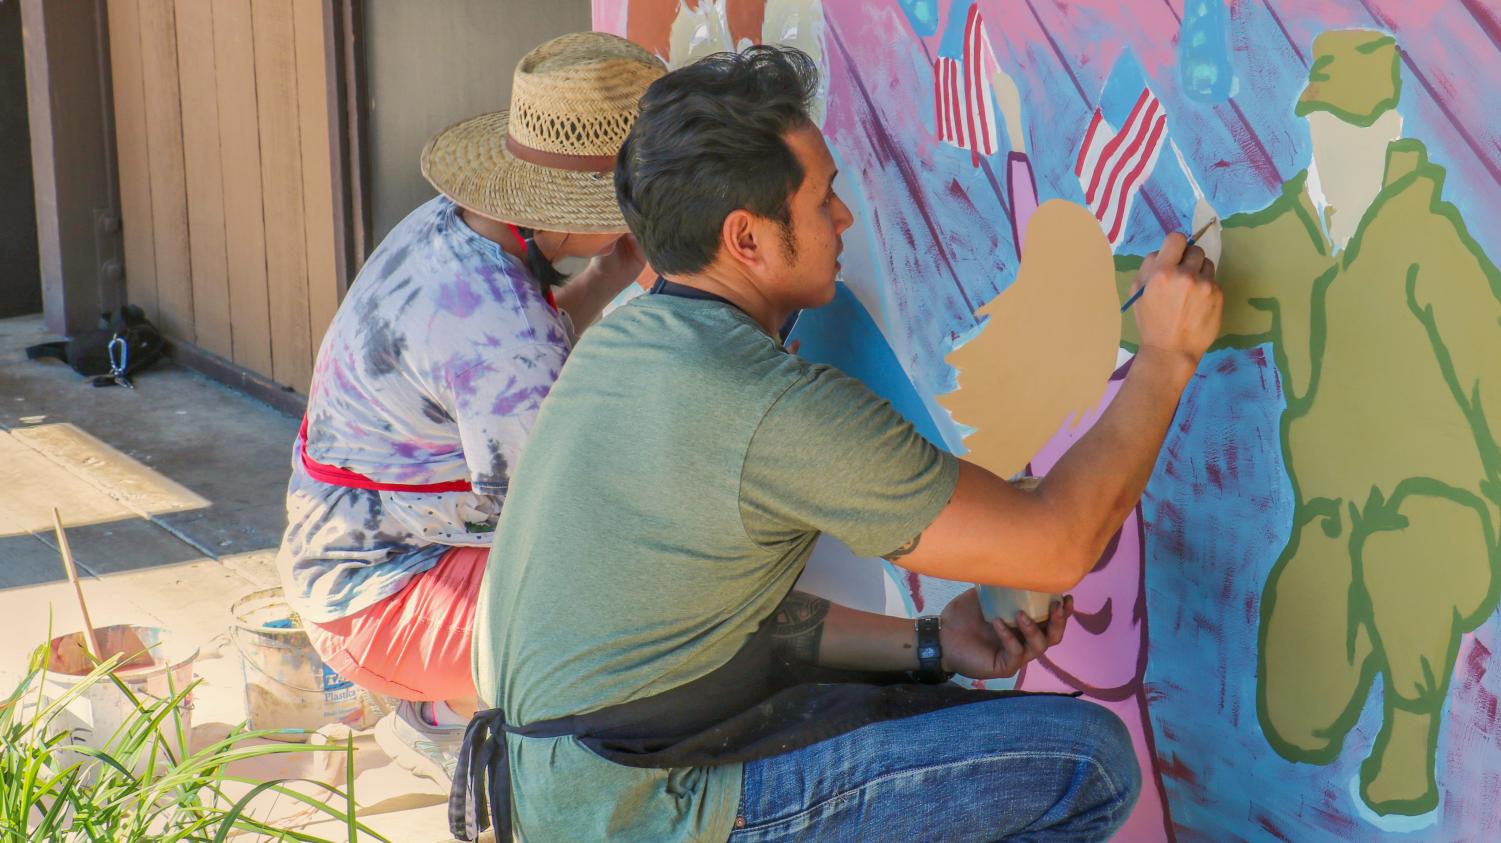 Students+and+faculty+paint+the+Veterans+Mural+by+the+Veterans+Resource+Center+at+Foothill+College